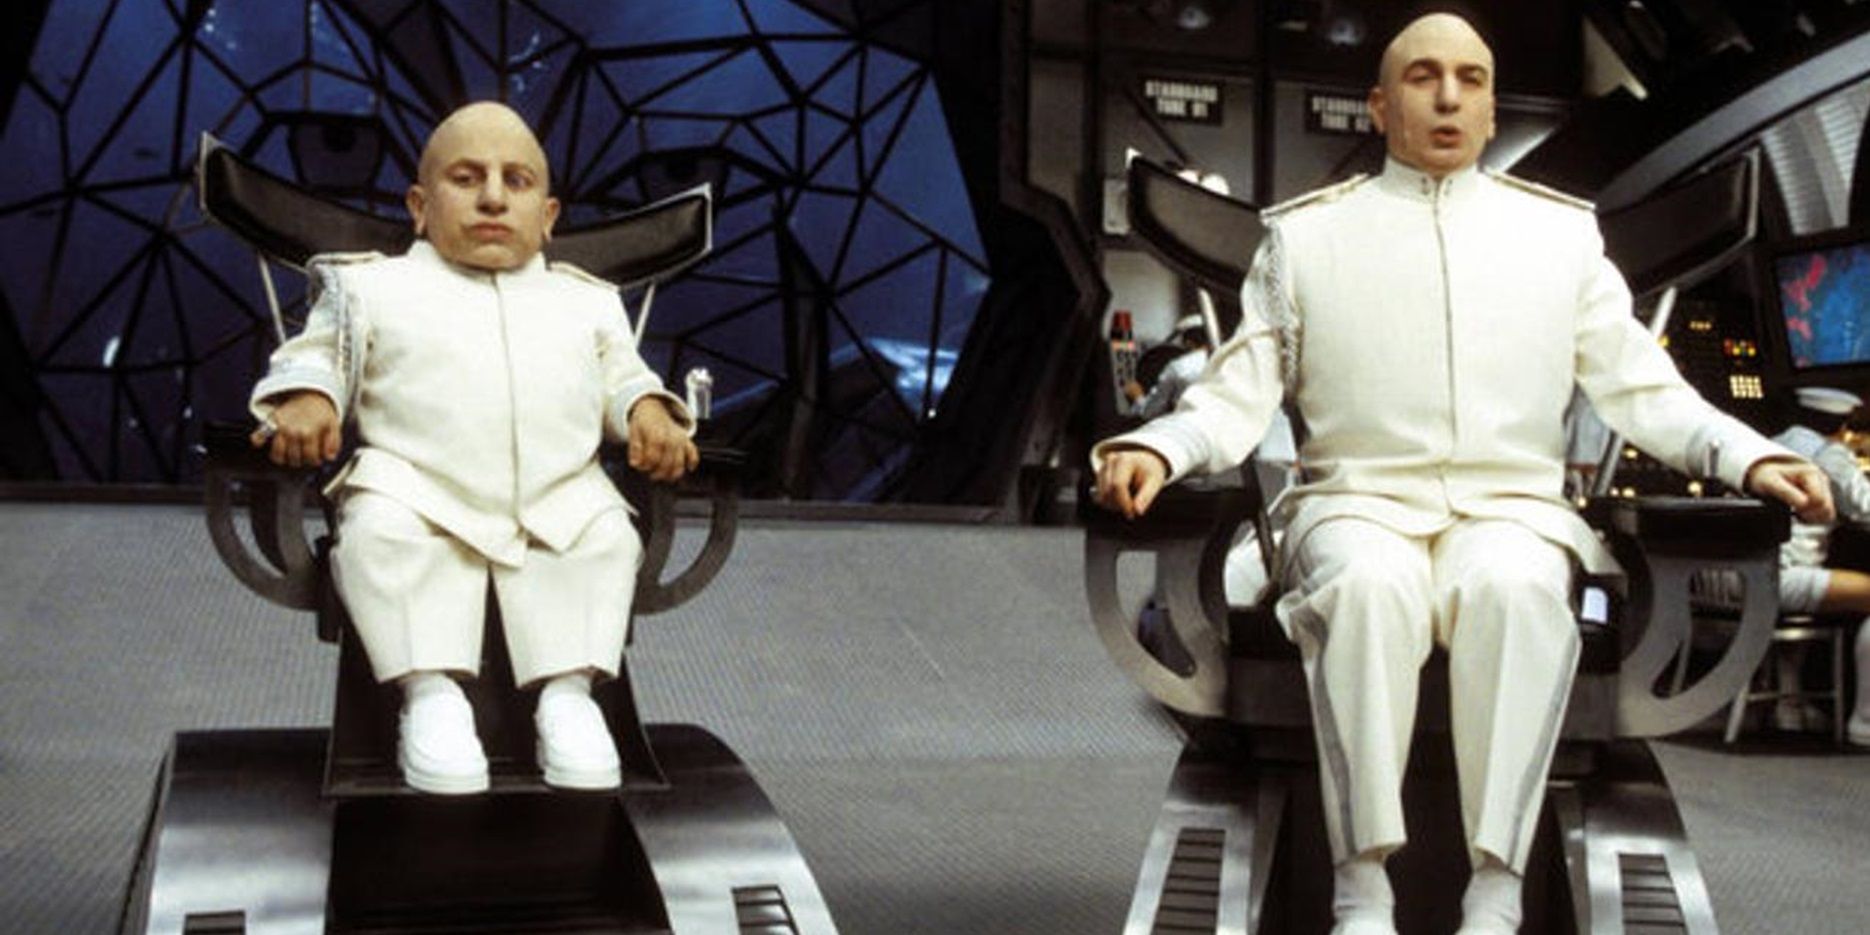 Austin Powers 4: Jay Roach says Mini-Me would have played key part